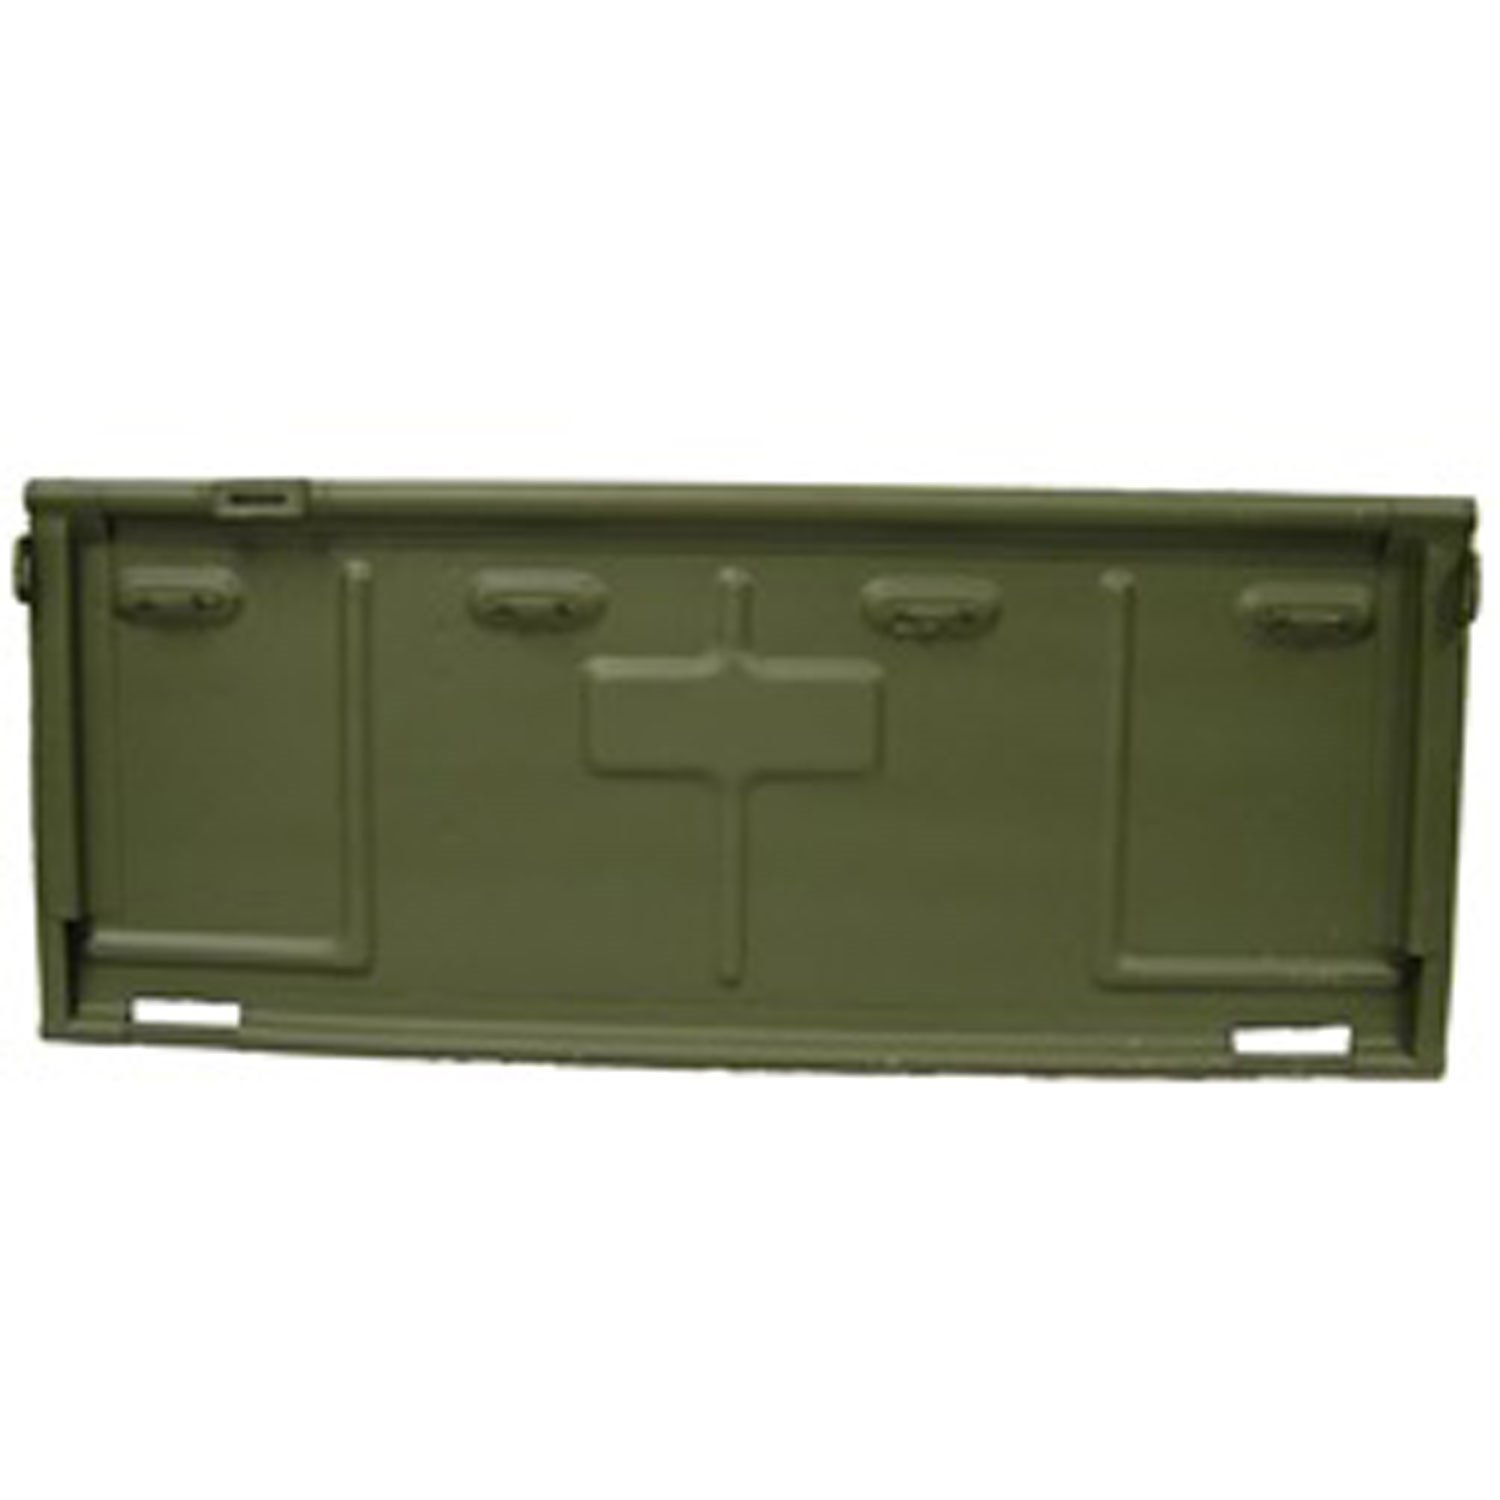 Replacement tailgate from Omix-ADA, Fits 50-52 Willys M38.